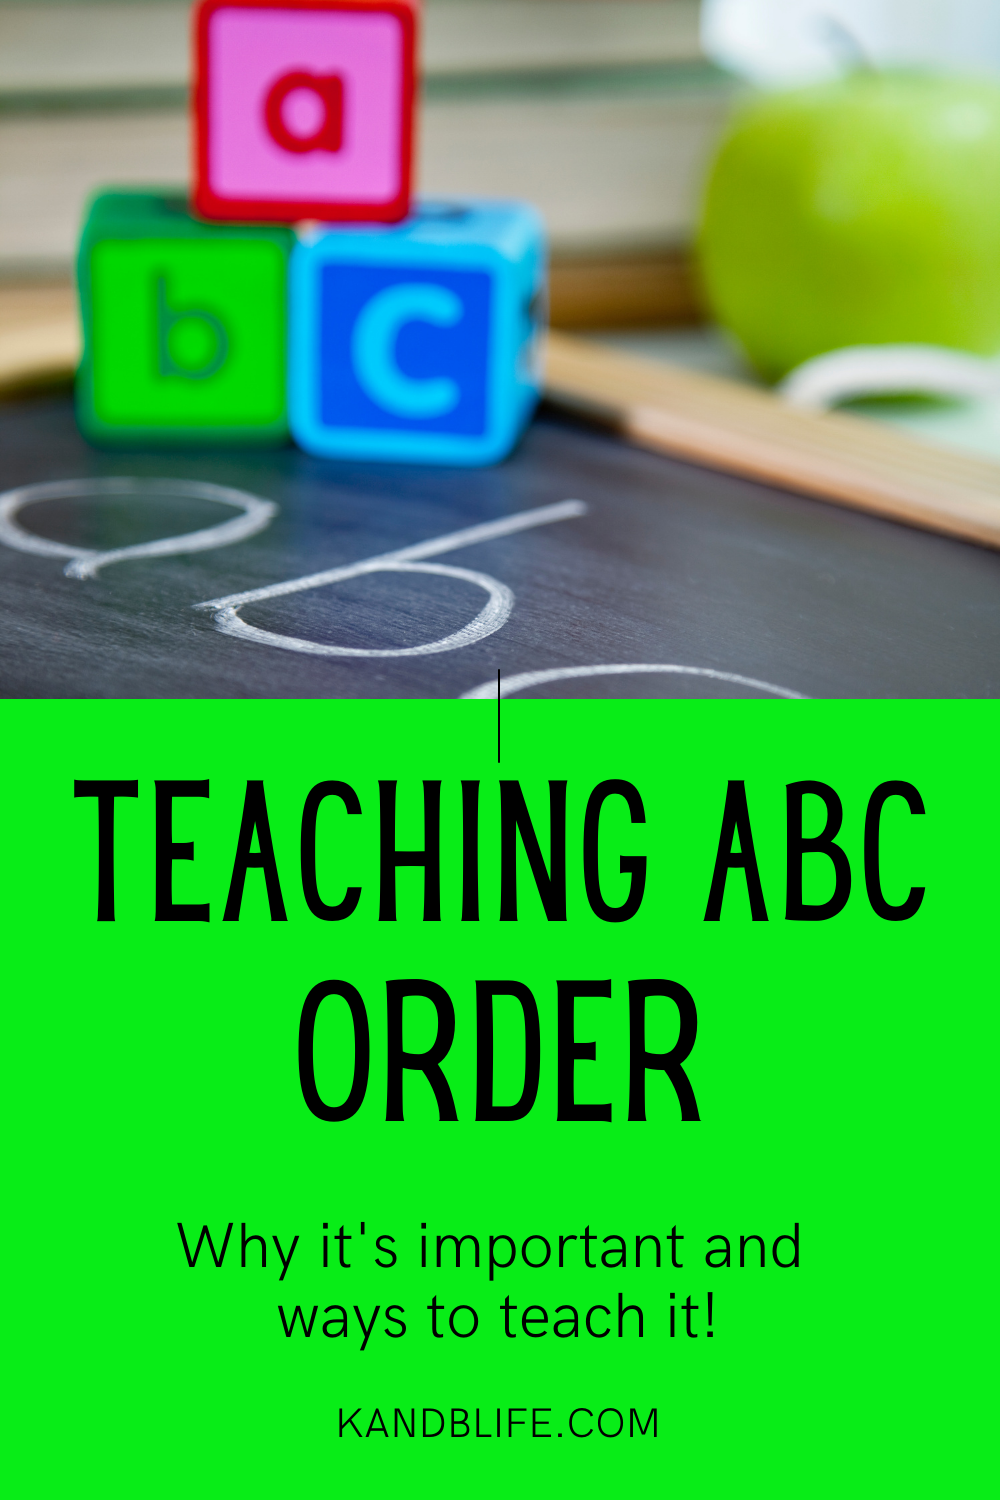 ABC blocks and a chalkboard for Teaching ABC Order, Why it's Important and ways to Teach it by K and B Life.